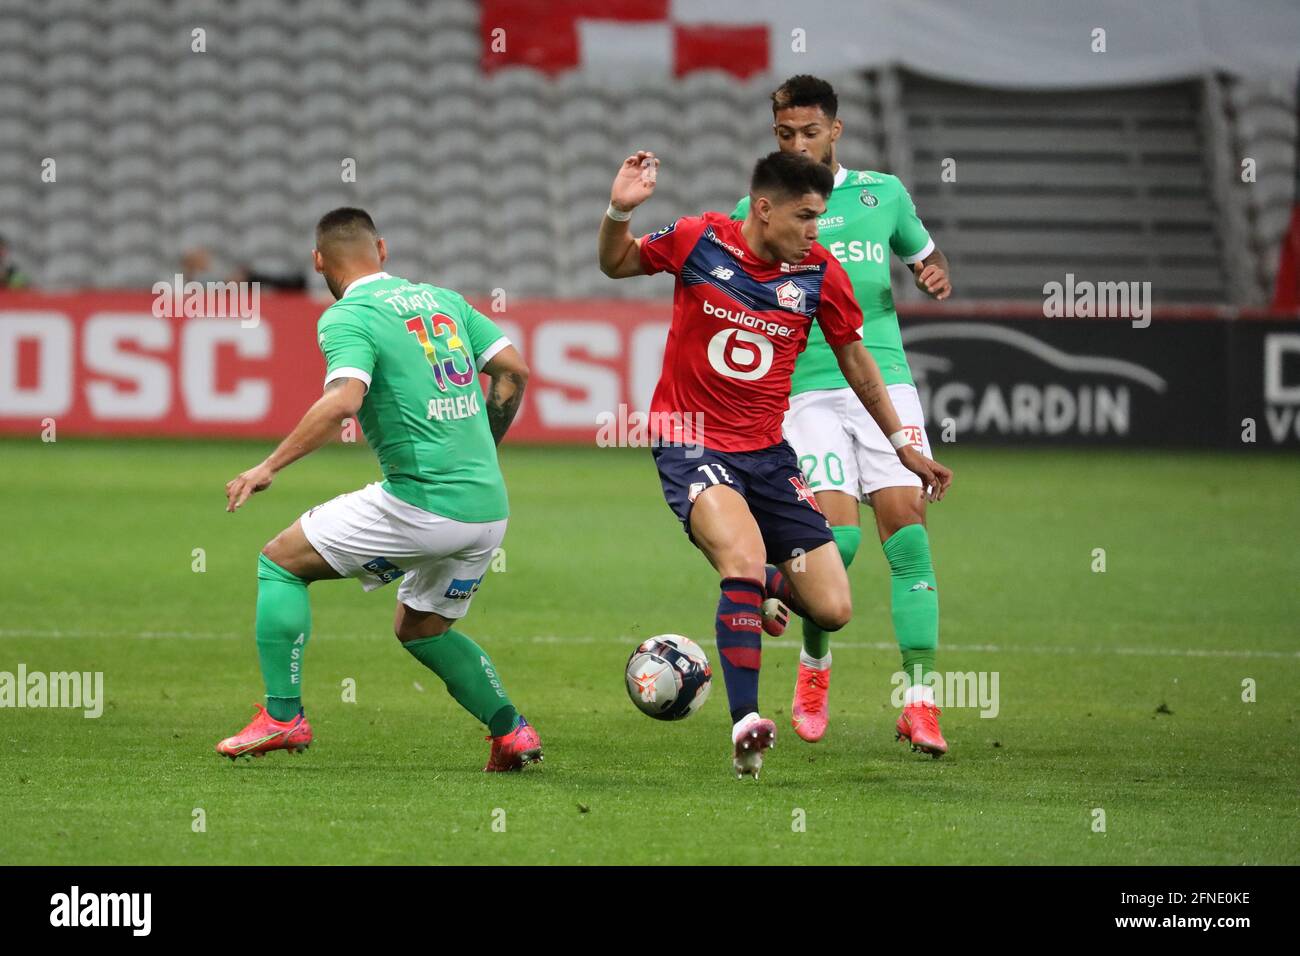 Luis ARAUJO 11 LOSC during the French championship Ligue 1 football match  between LOSC Lille and AS Saint-Etienne on May 16, 2021 at Pierre Mauroy  stadium in Villeneuve-d'Ascq near Lille, France -